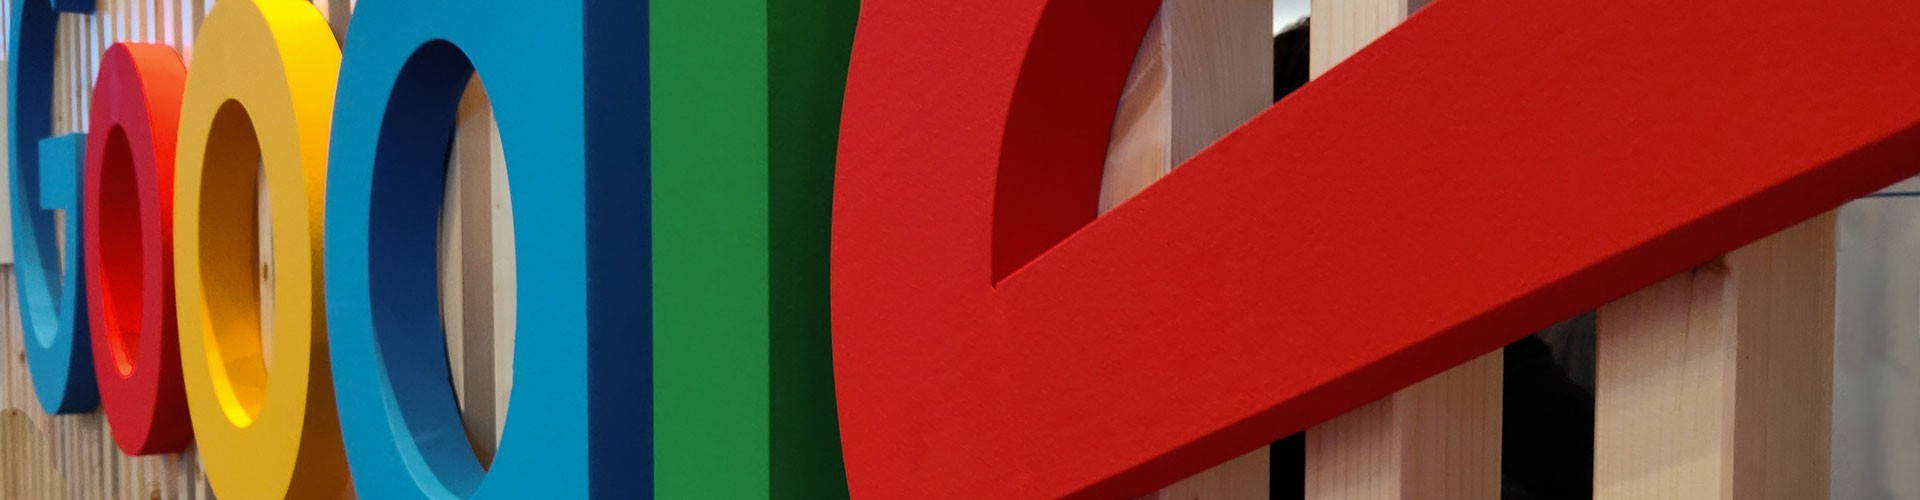 close up perspective distorted google 3D sign